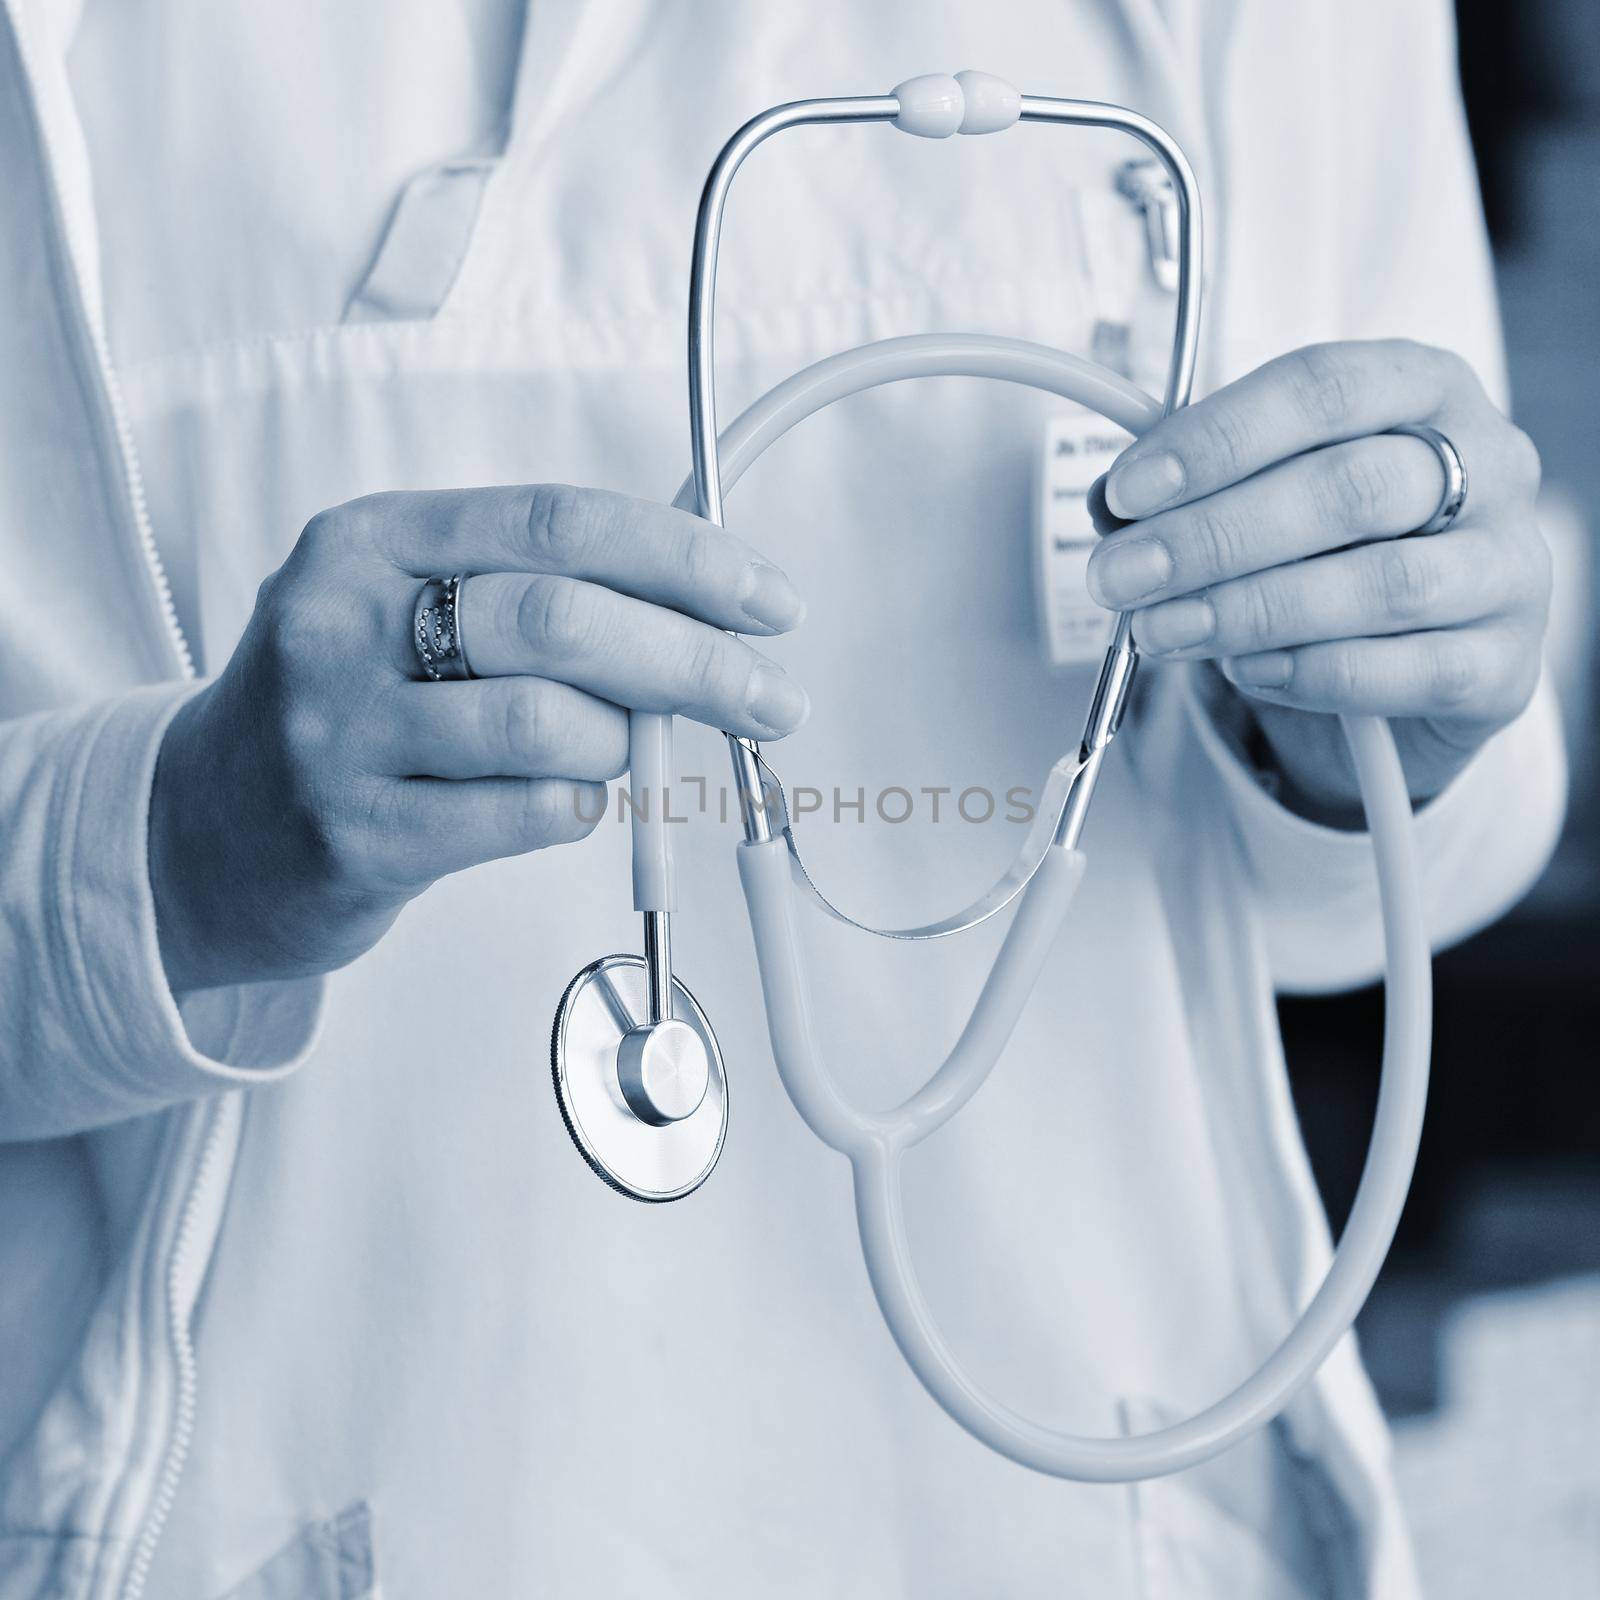 Female doctor holding a stethoscope. Concept for health and medicine. Hospital background.